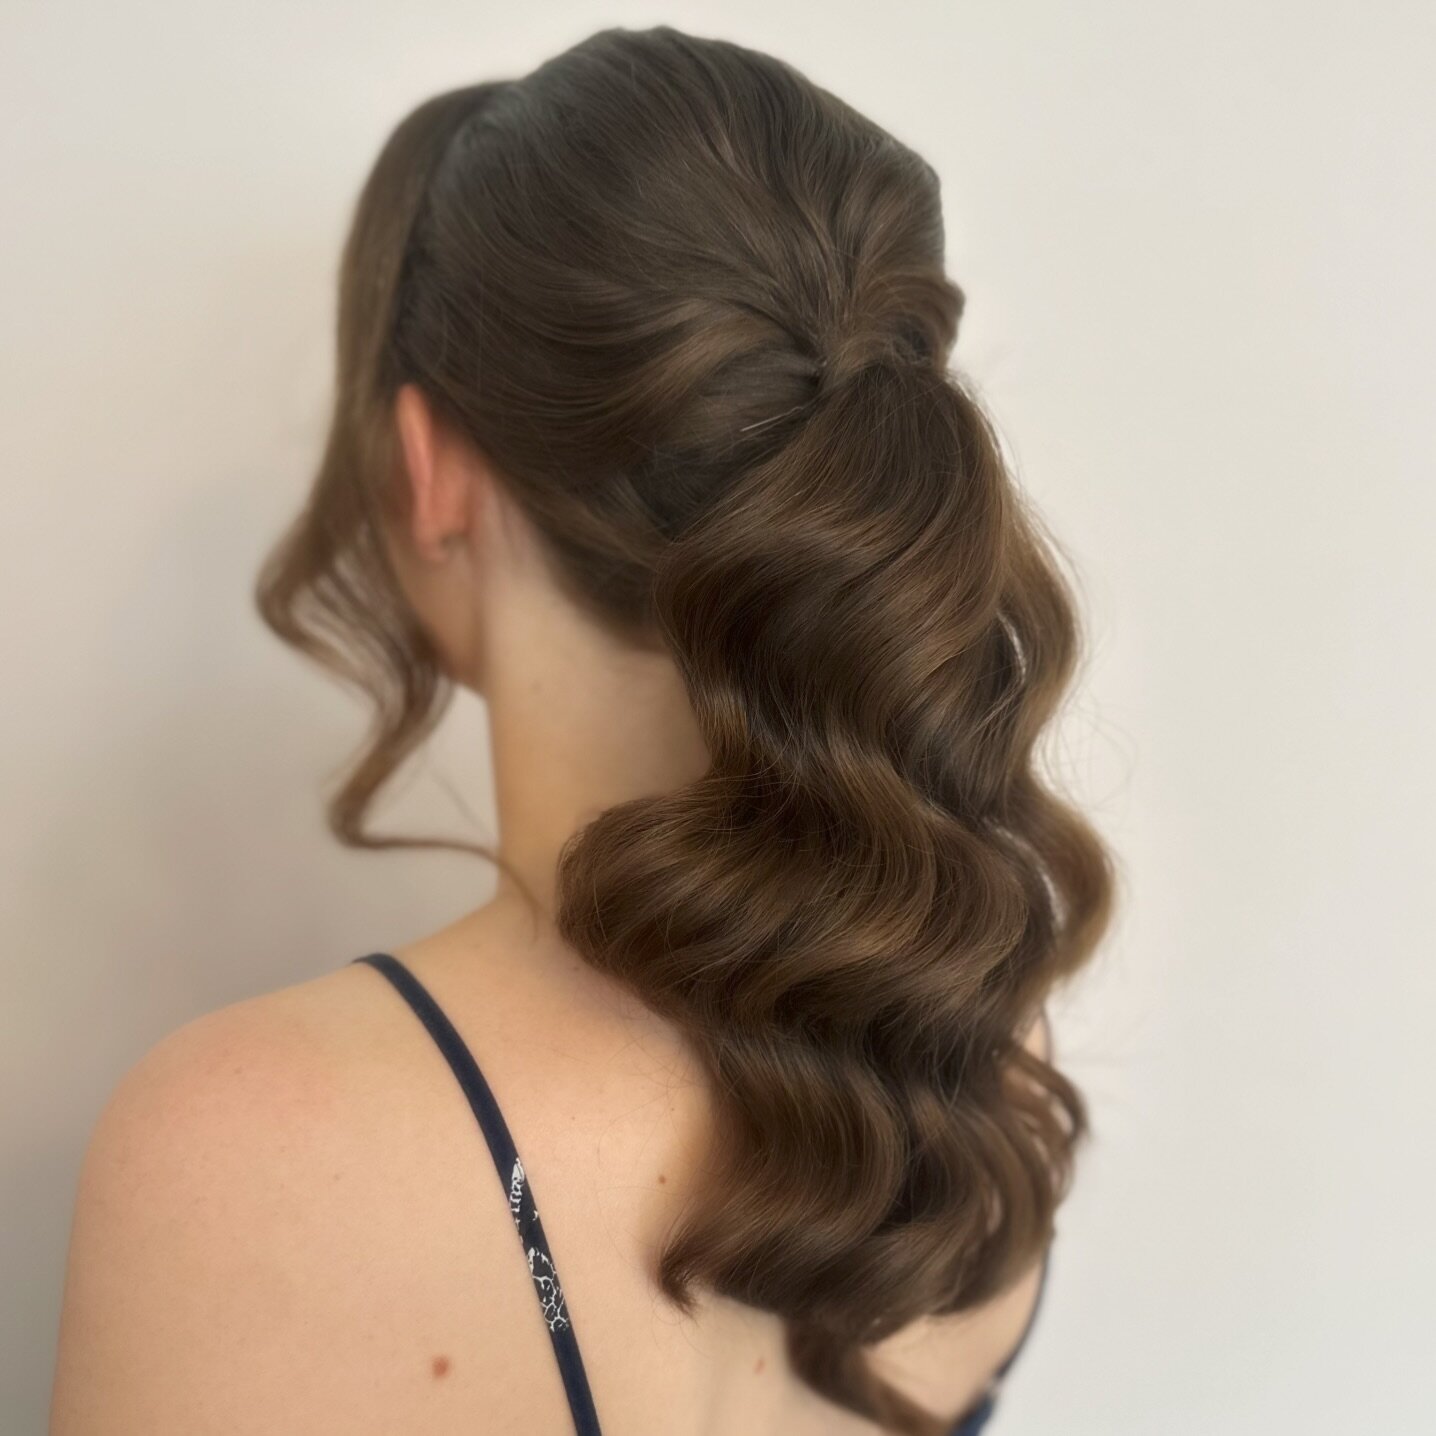 Would you like to know the secret to getting your natural hair to look full and retain as much length as possible in your ponytail when extensions aren&rsquo;t available?&hellip;
Multiple ponytails (in this case 3) all on top of each other.